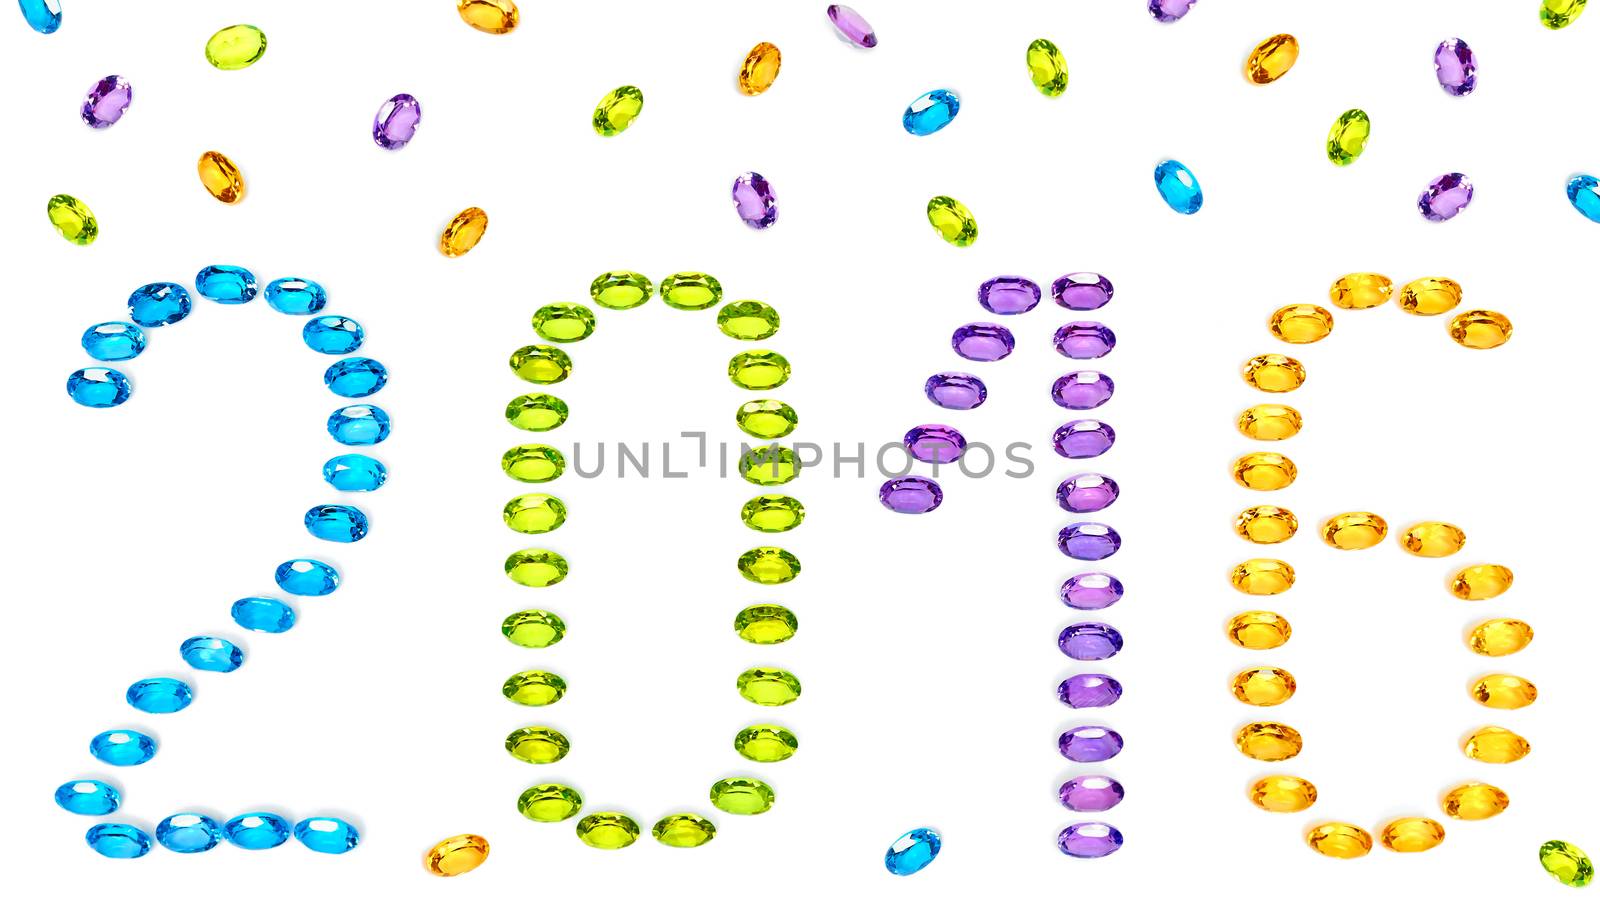 New Year 2016. Christmas. Jewelry digits, colorful precious stones placer closeup isolated. Gems Topaz, Amethyst, Citrine, Peridot, vivid multicolored unusual greeting card. Sparkling happy holiday 